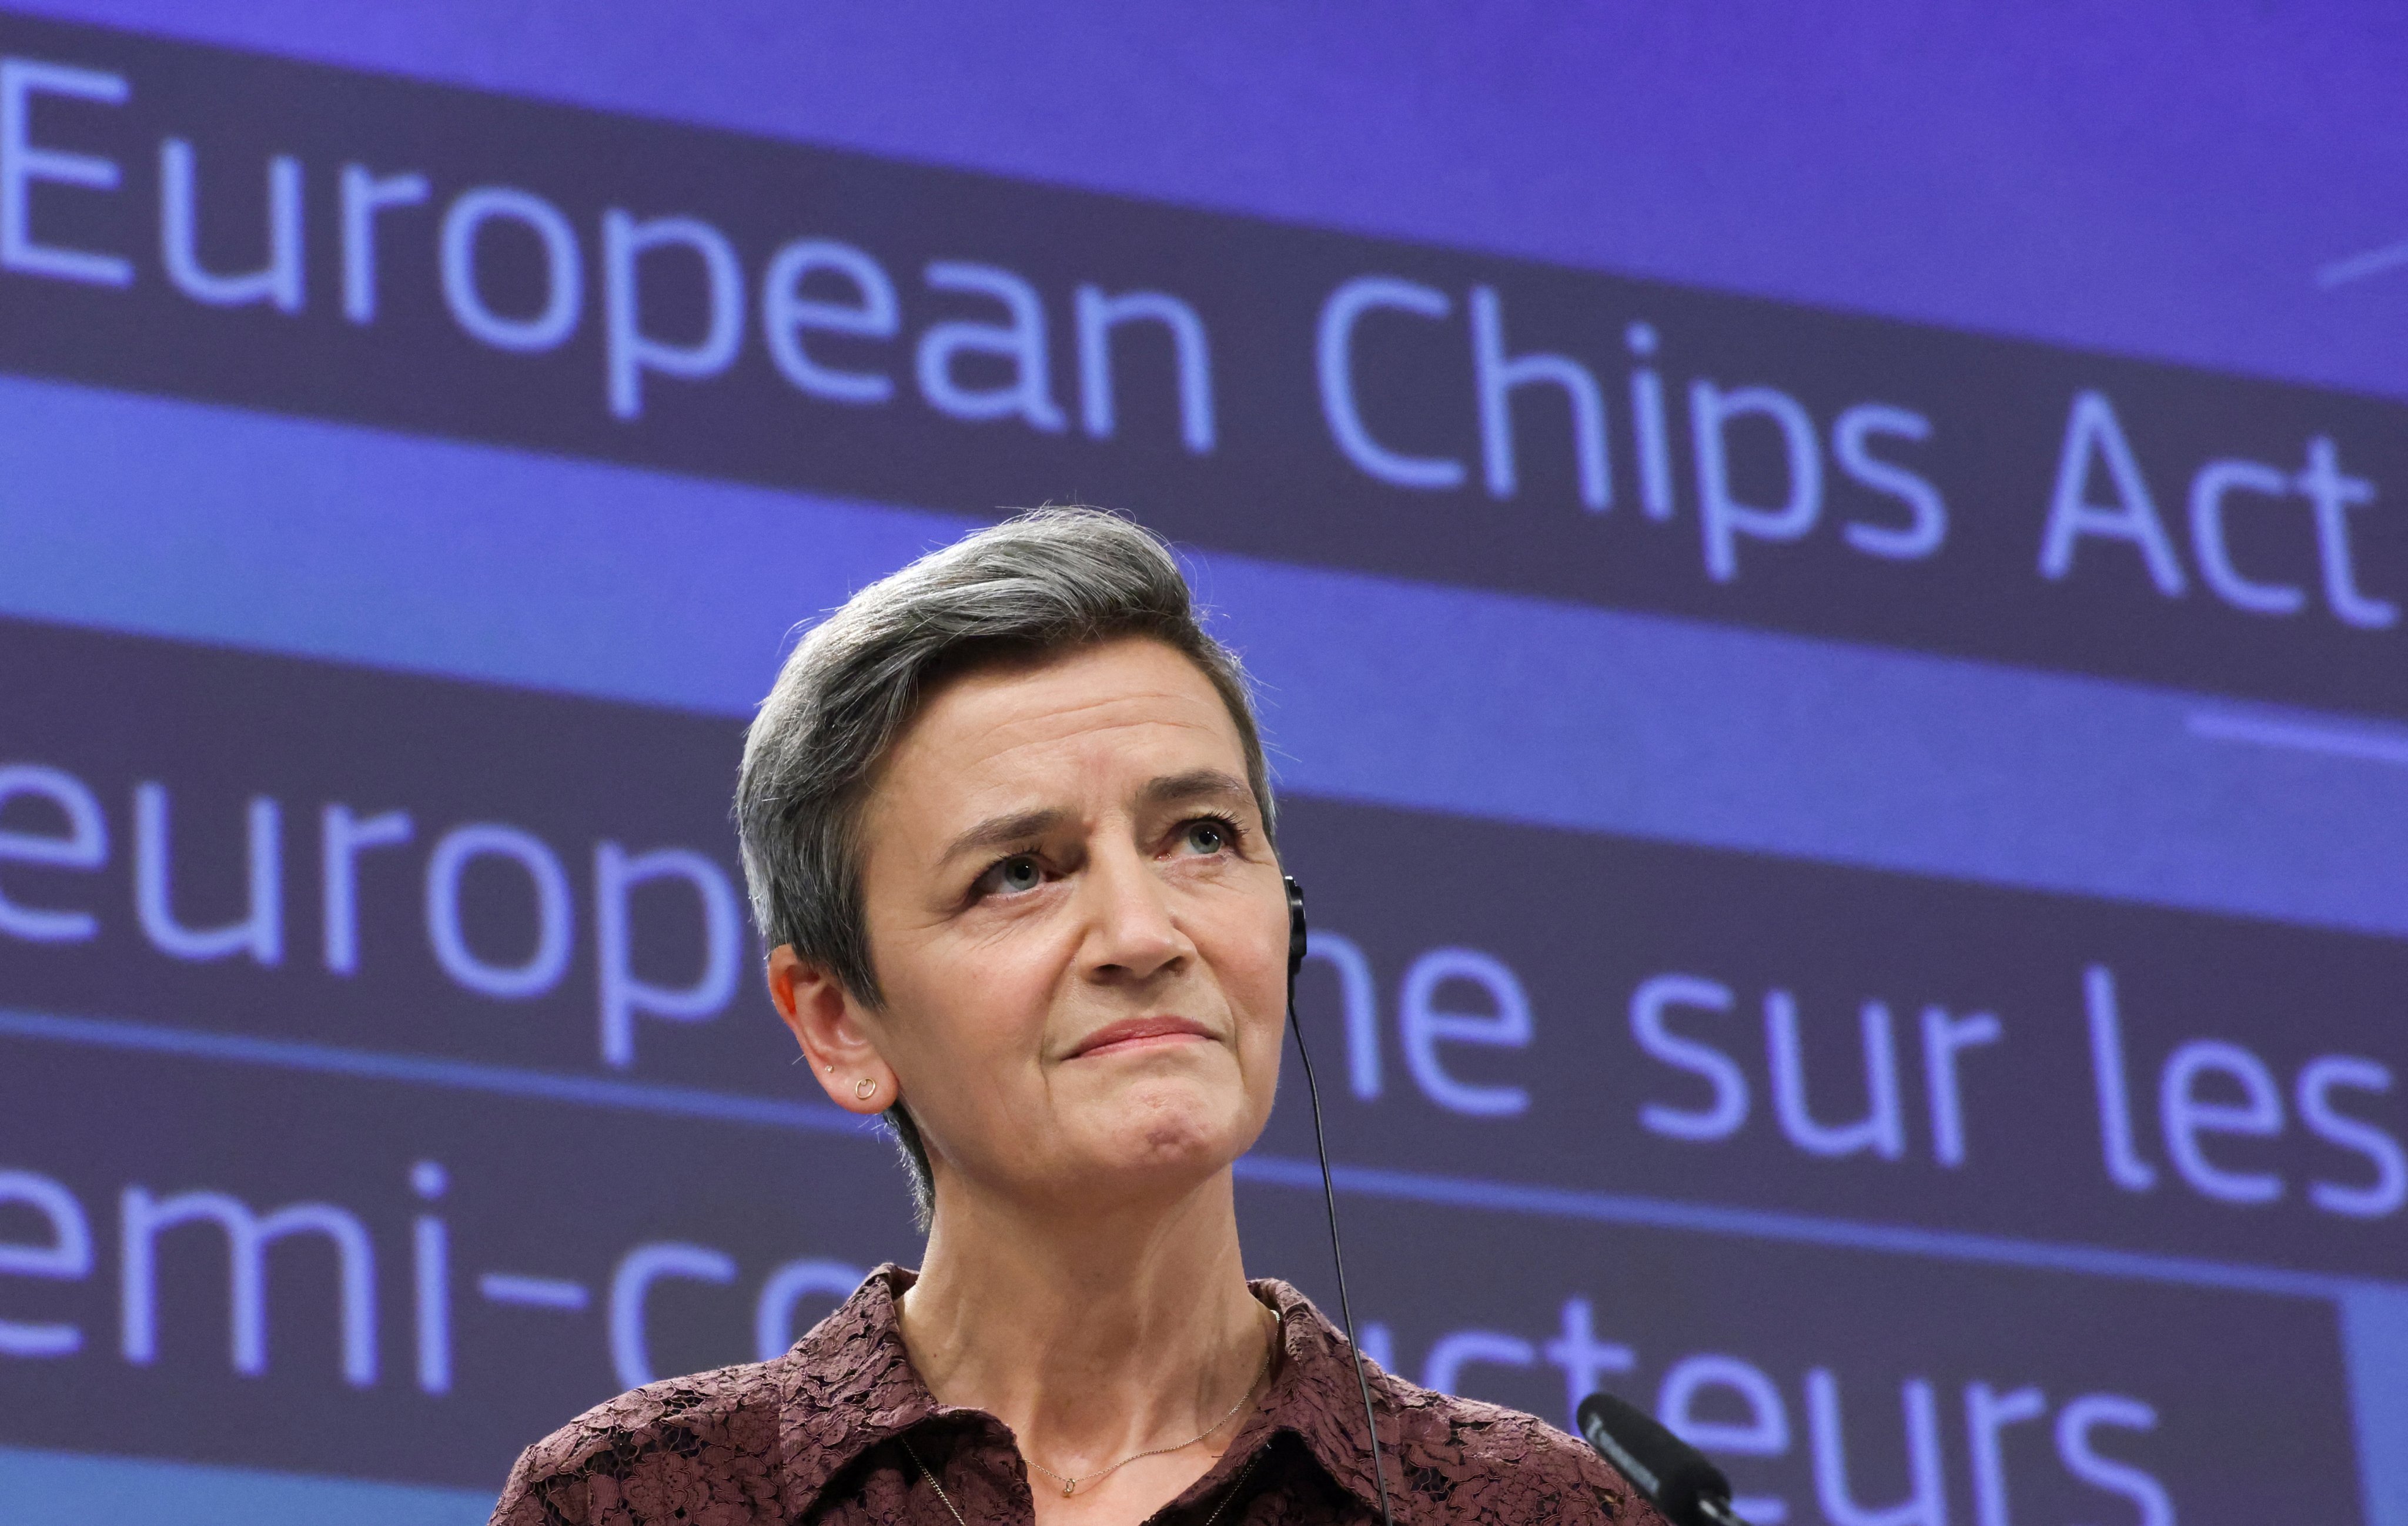 European Commission Vice-President Margrethe Vestager is seen at a news conference on the European Chips Act, a plan to boost the chip industry in which Taiwan features prominently, in Brussels, Belgium, on February 8. Photo: Reuters